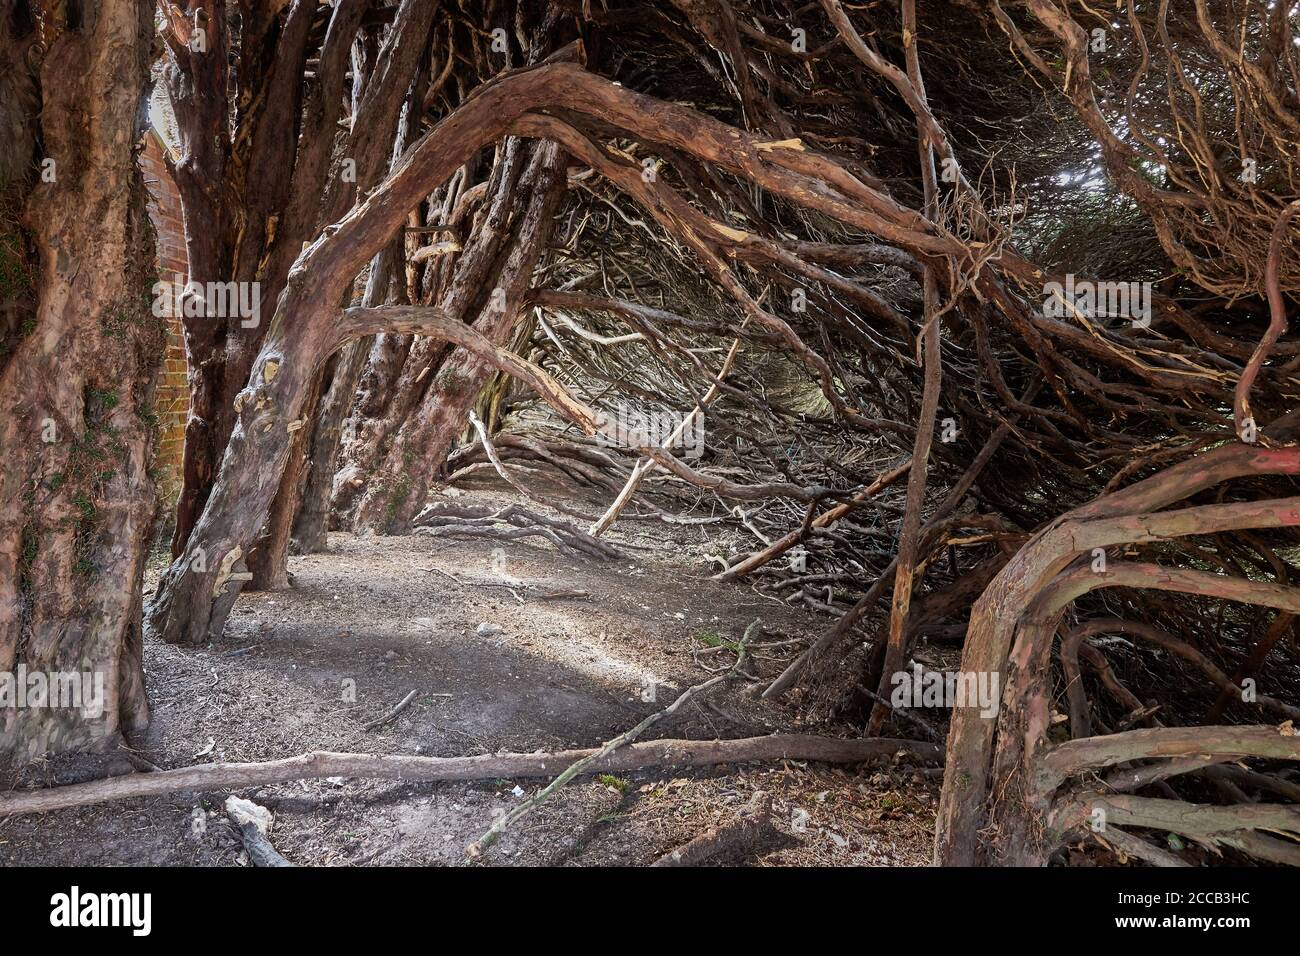 view through the inside of a wide old yew hedge showing the twisted gnarled Taxus baccata trunks and branches forming a passage like mystical tunnel Stock Photo